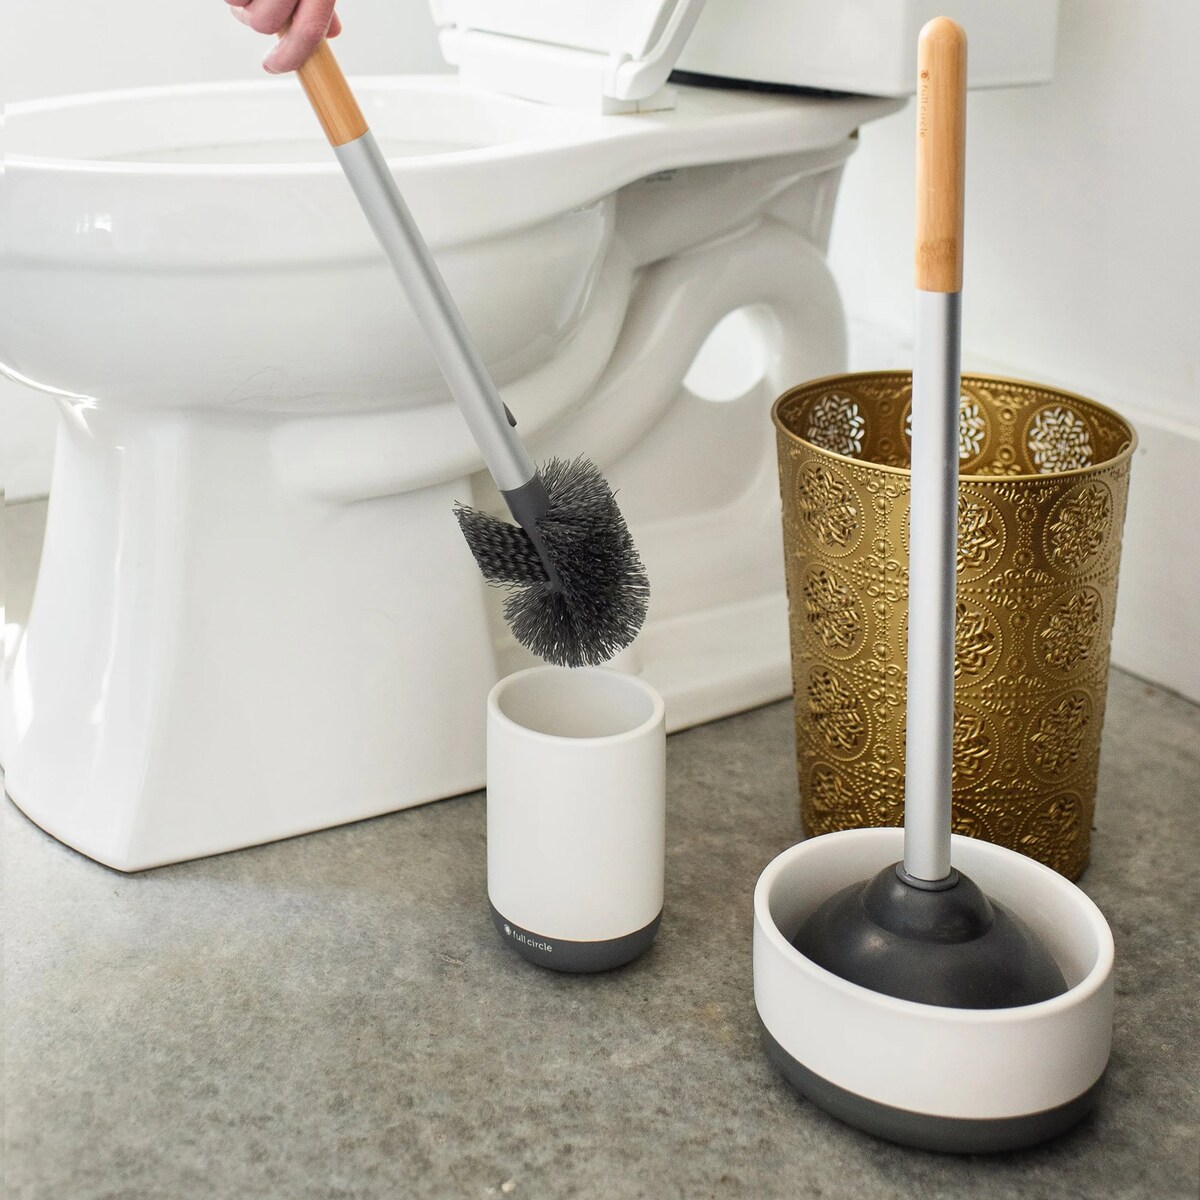 How To Hide A Plunger And Toilet Brush